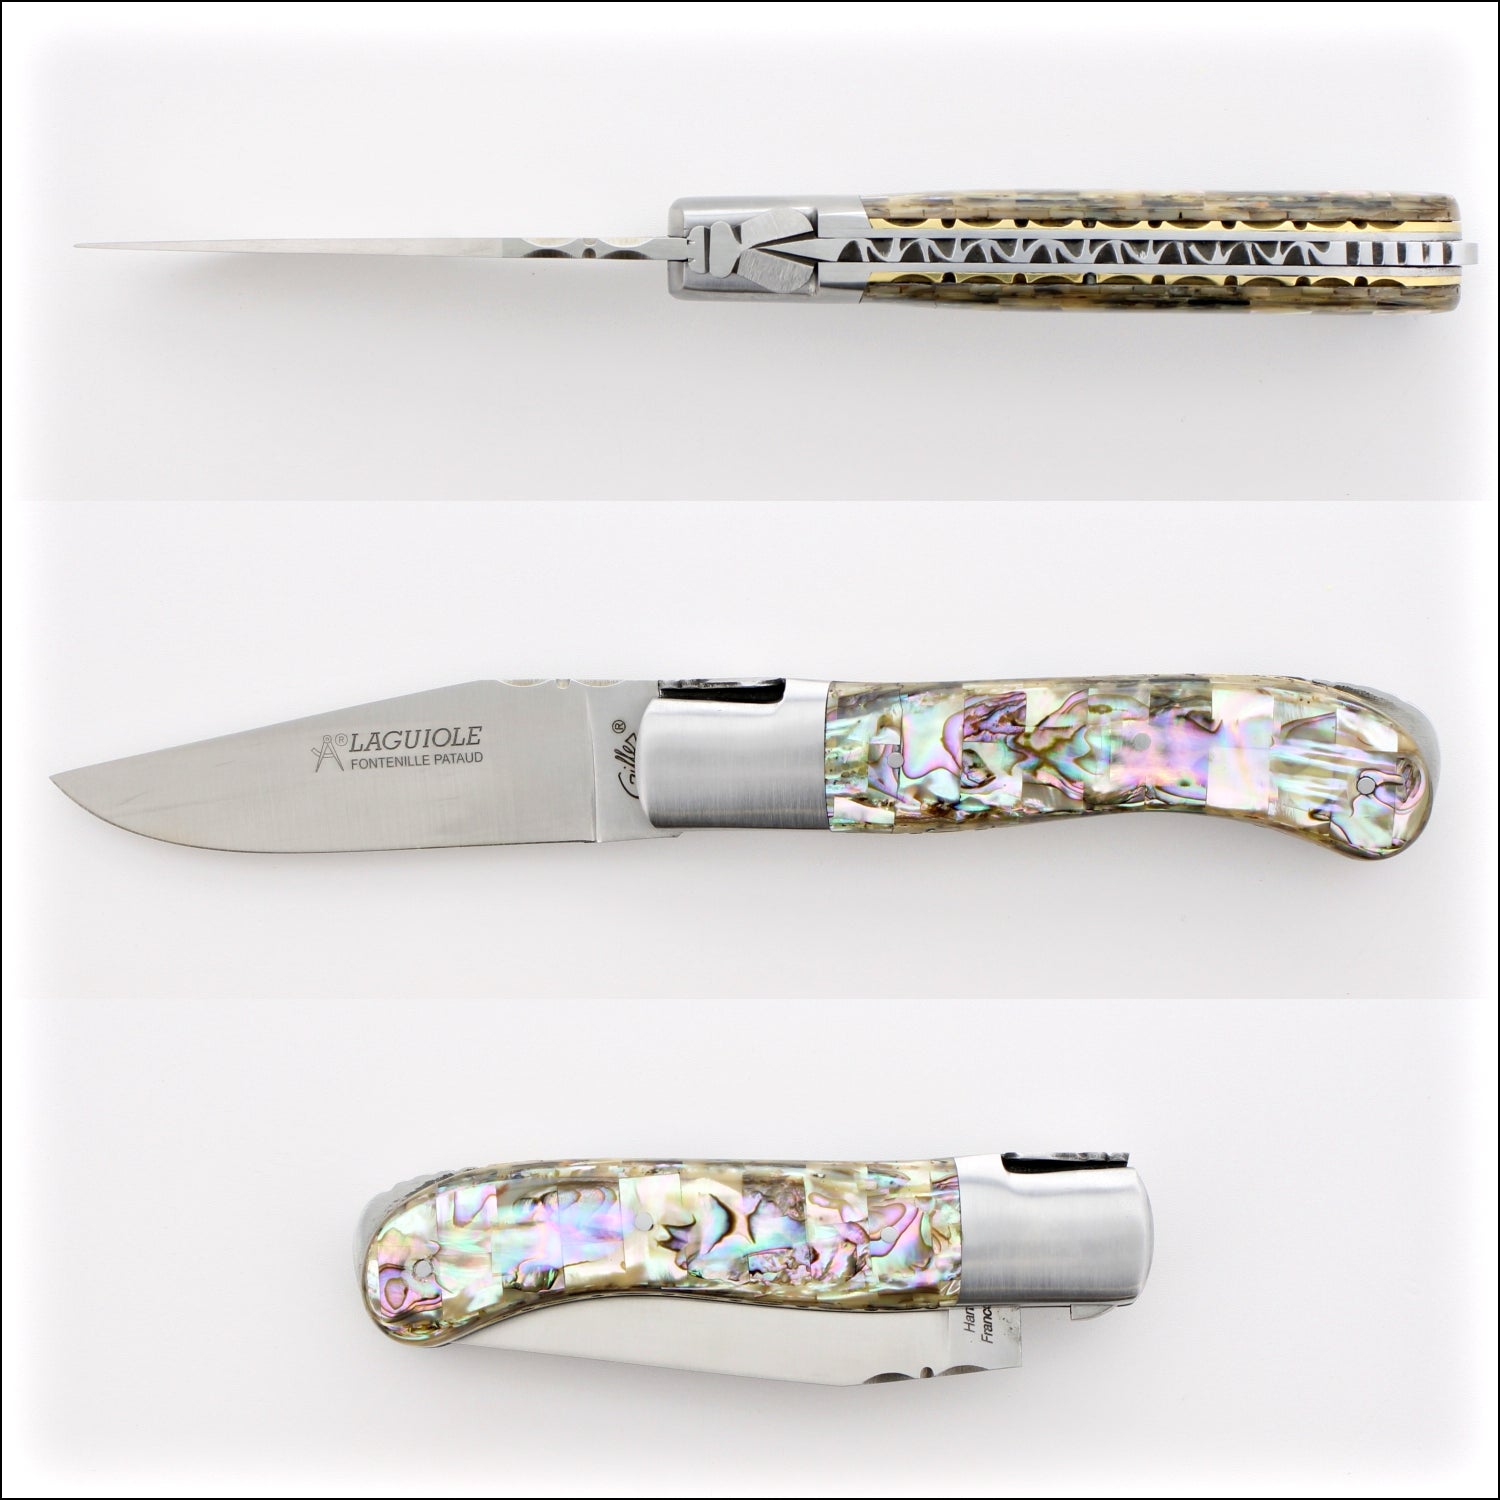 Laguiole Gentleman's Knife Guilloche - Mother of Pearl